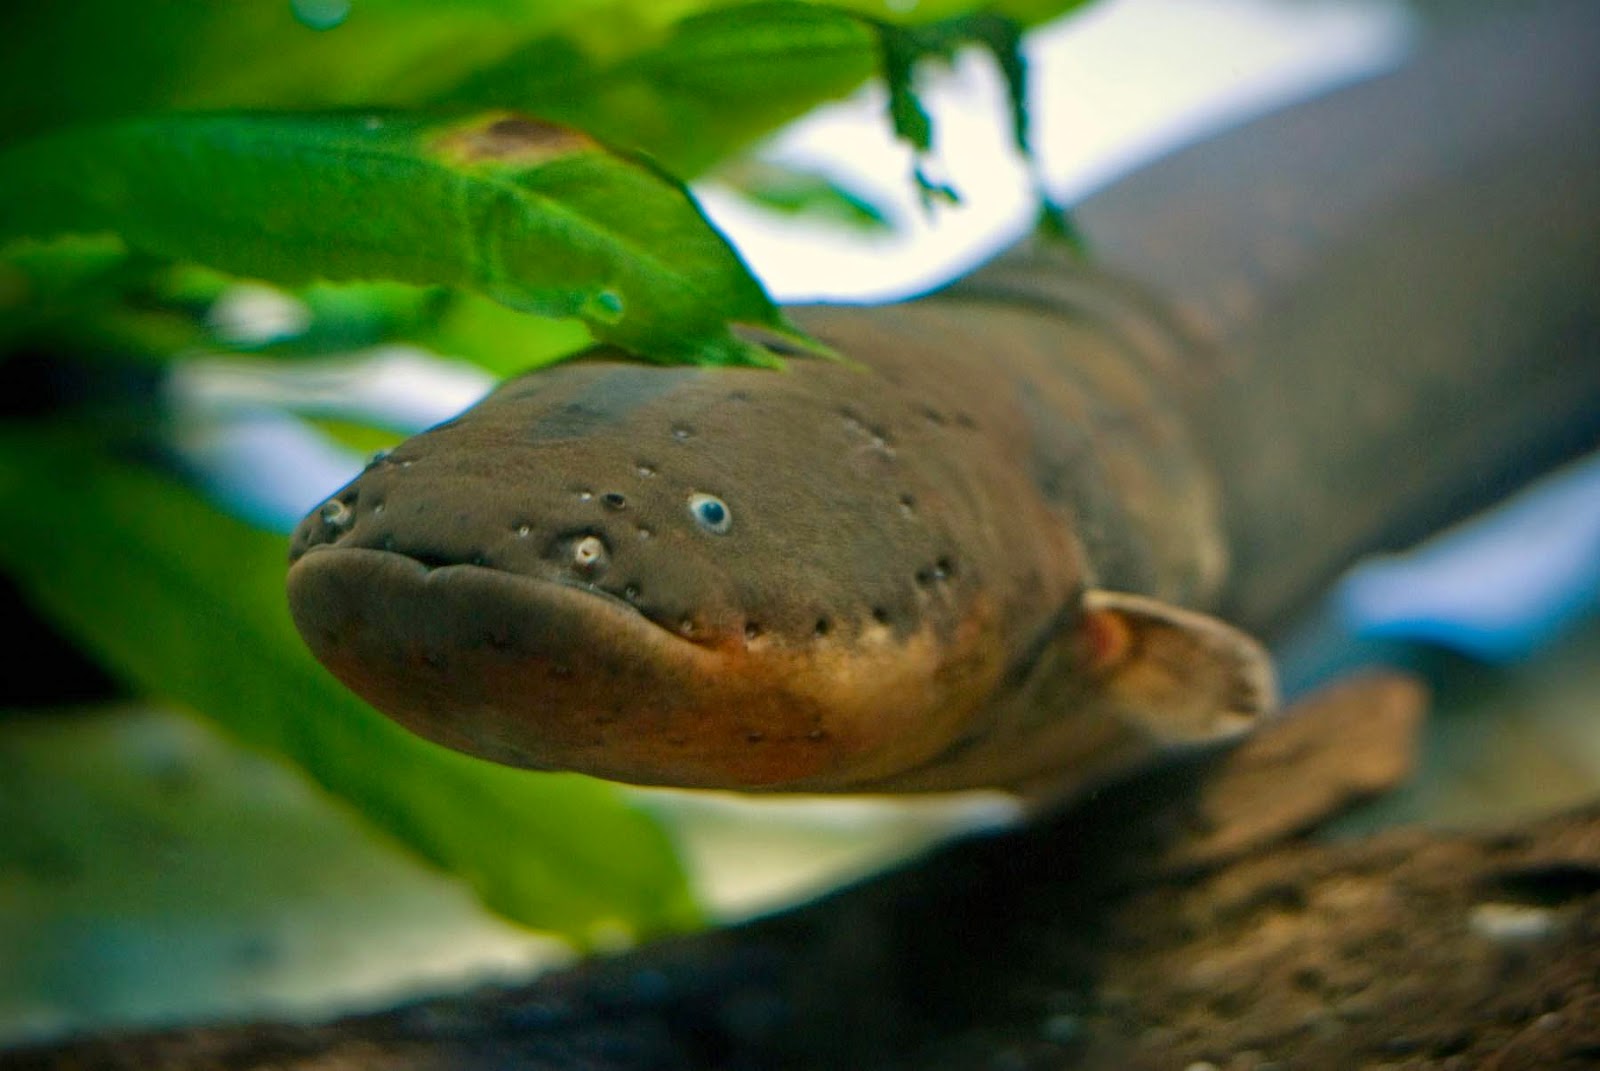 Wildlife Views The amazing electrical capabilities of the electric eel